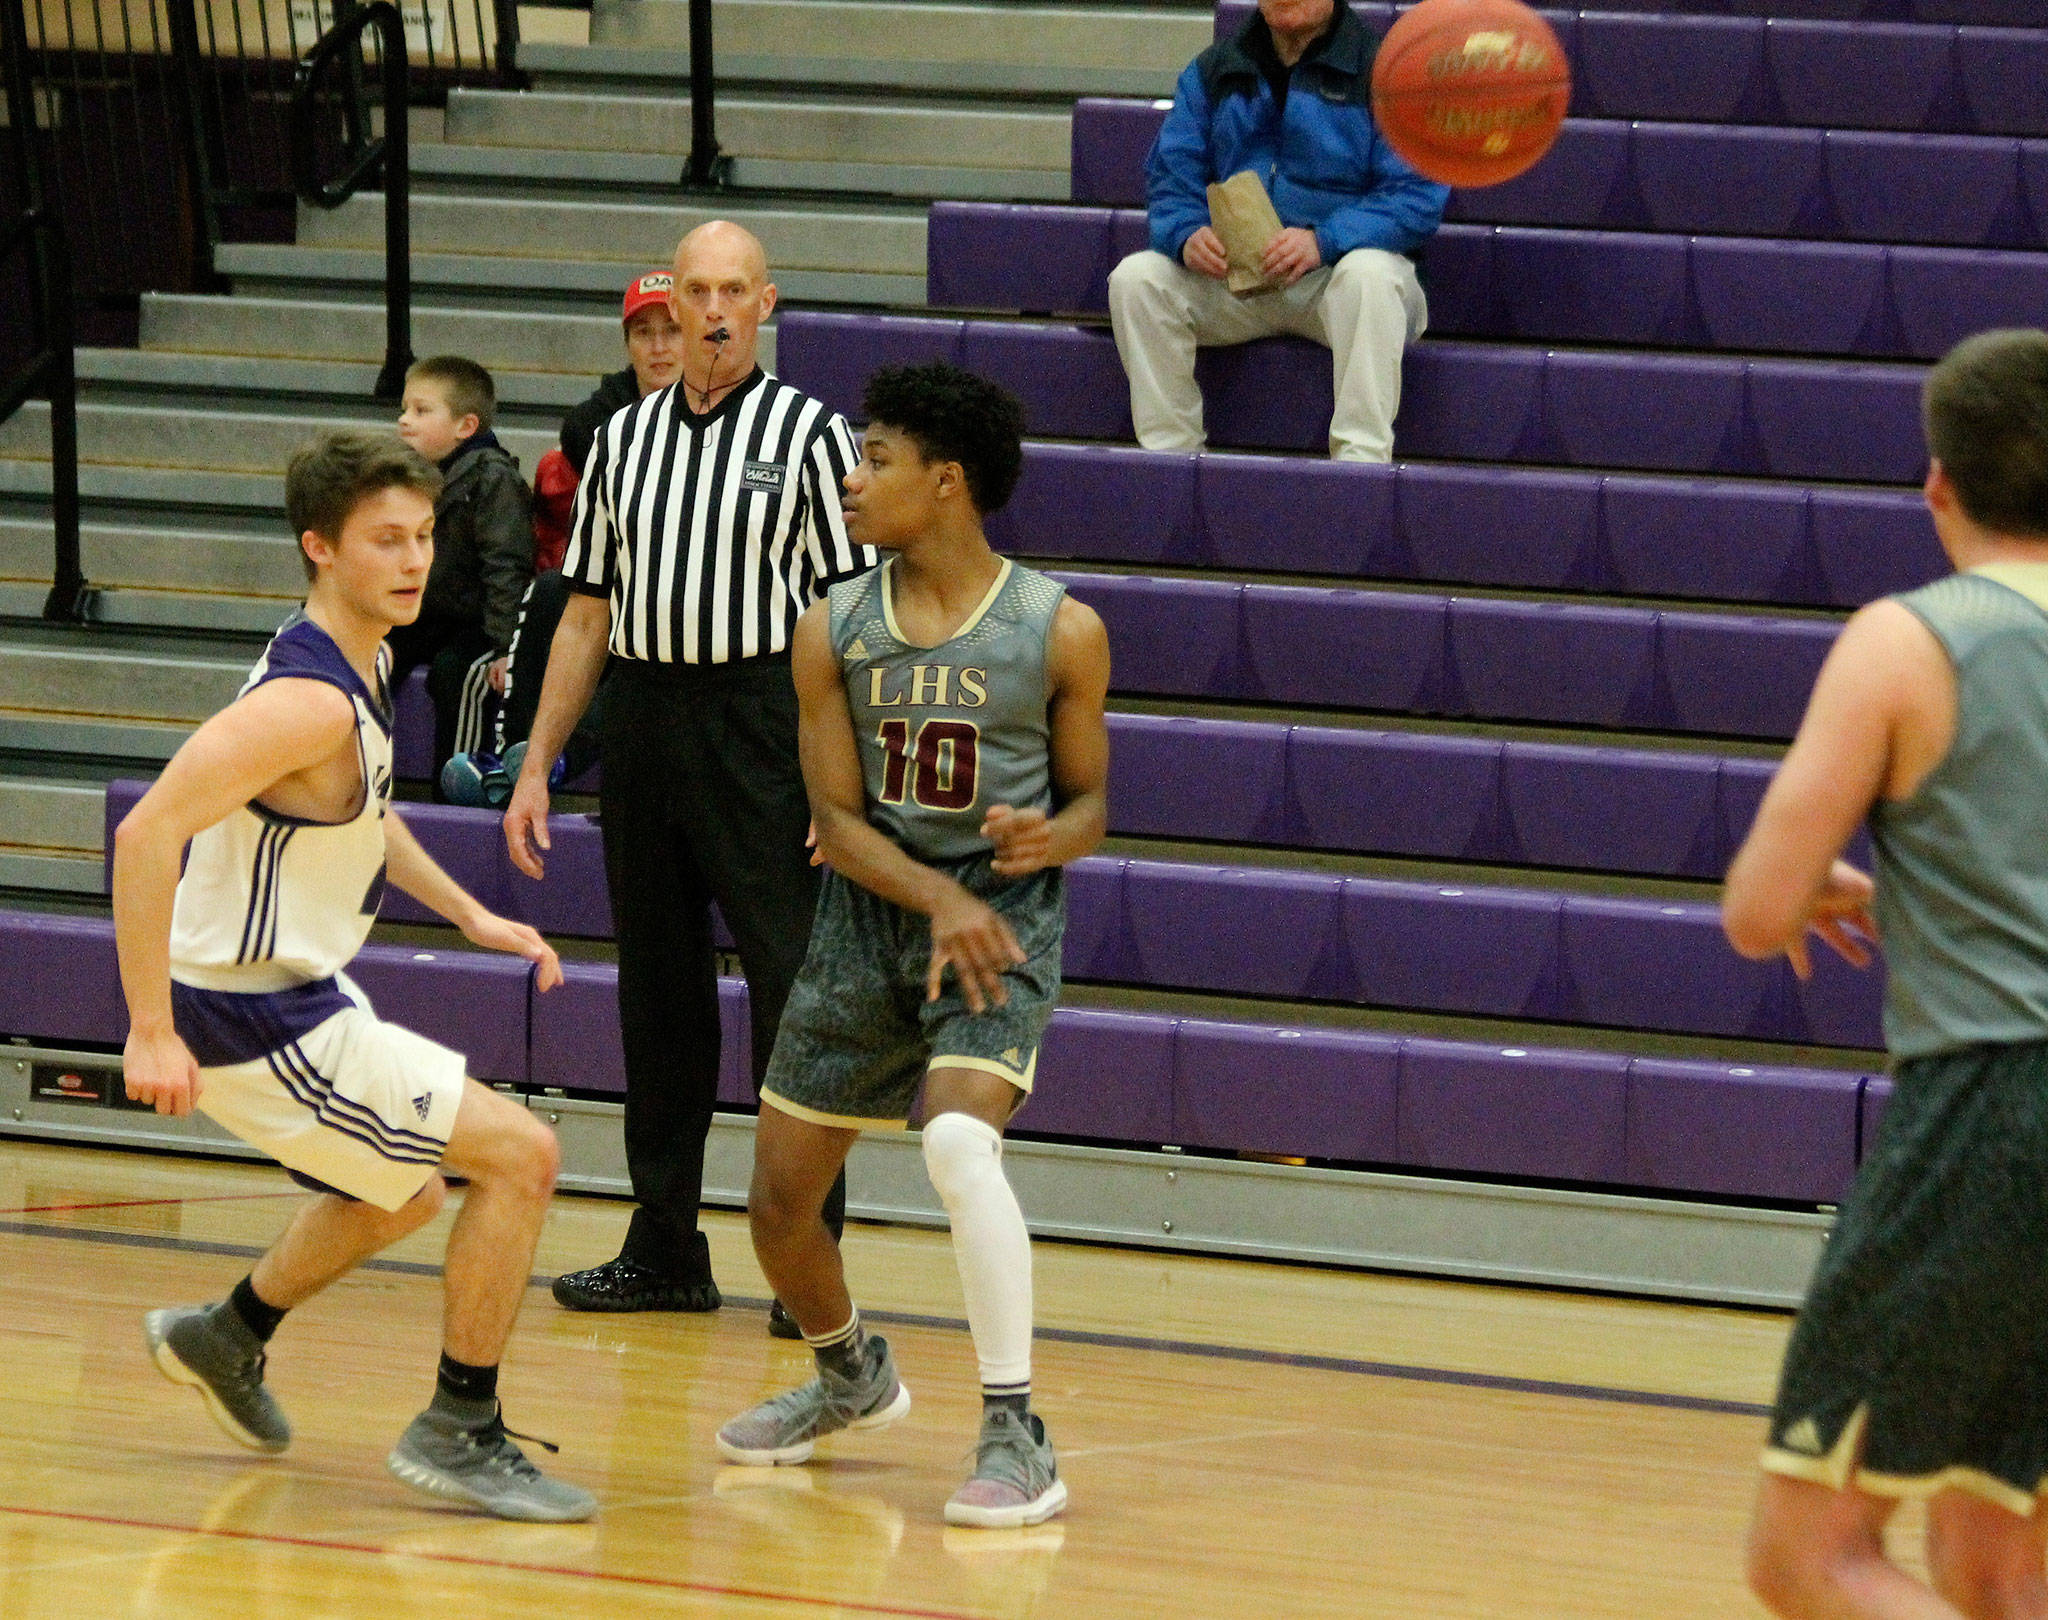 Hap Fakkema referees a high school district game between Anacortes and Lakewood last week. (Photo by Jim Waller/Whidbey News-Times)